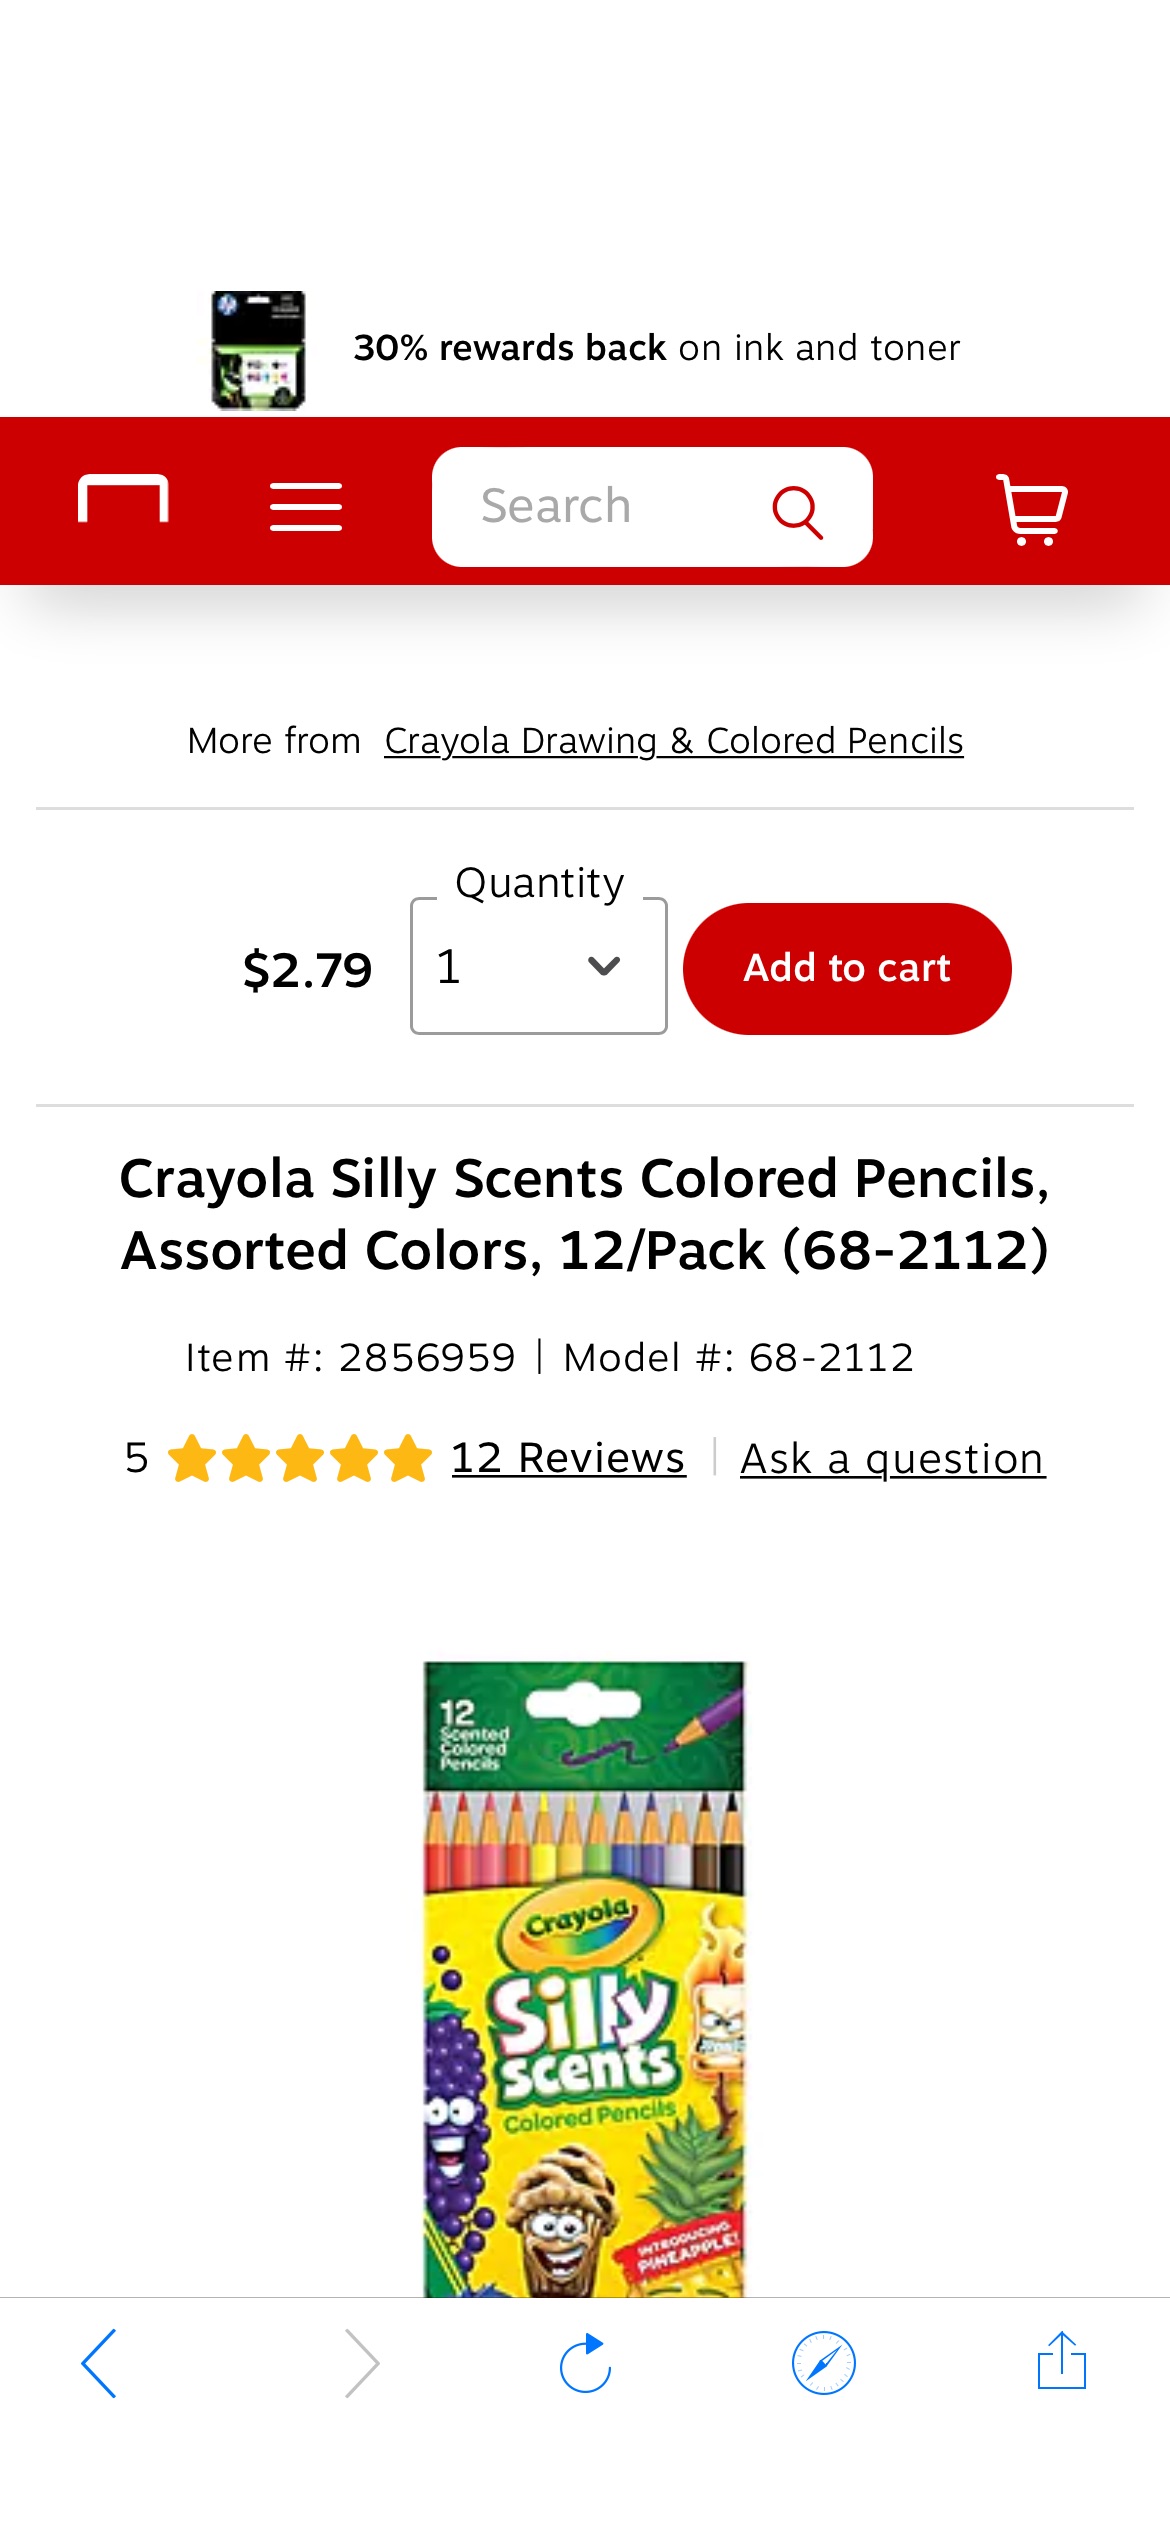 Crayola Silly Scents Colored Pencils, Assorted Colors, 12/Pack (68-2112) | Staples